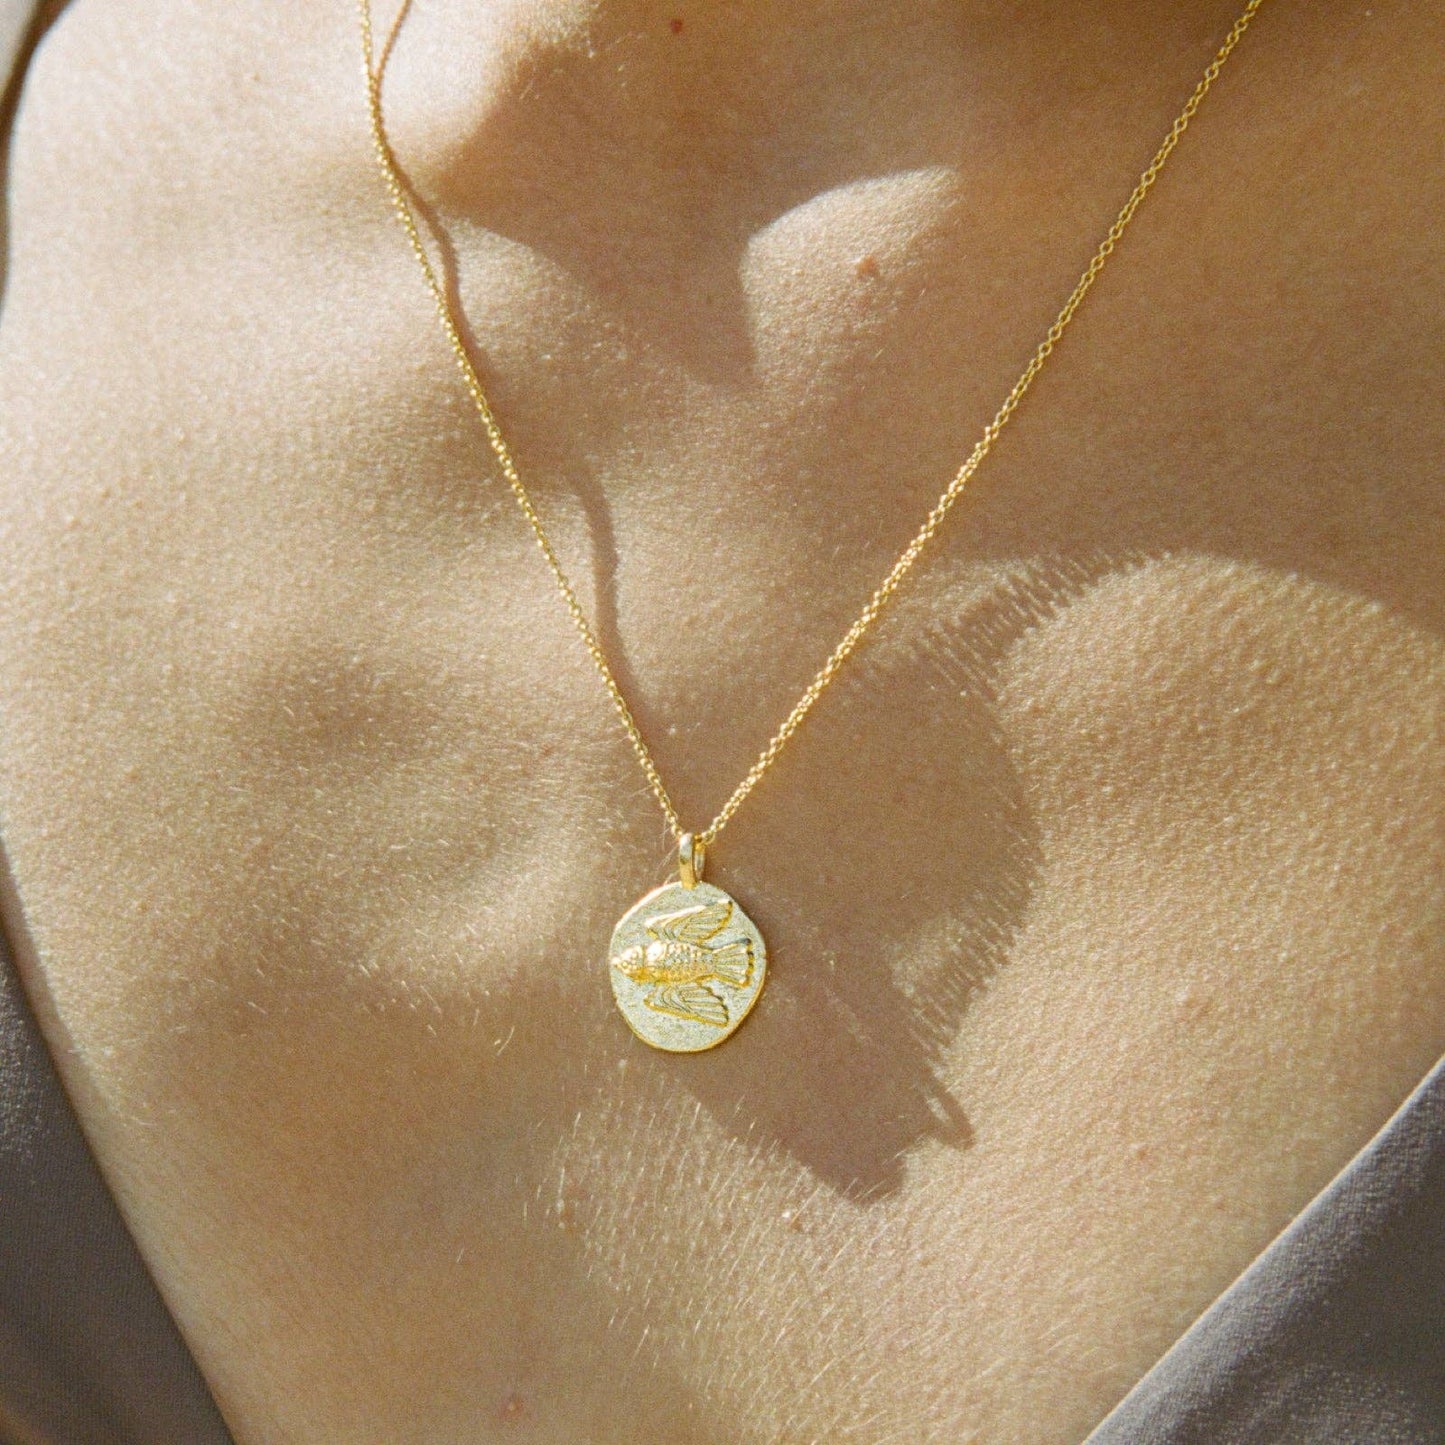 Myna Necklace | Jewelry Gold Gift Waterproof